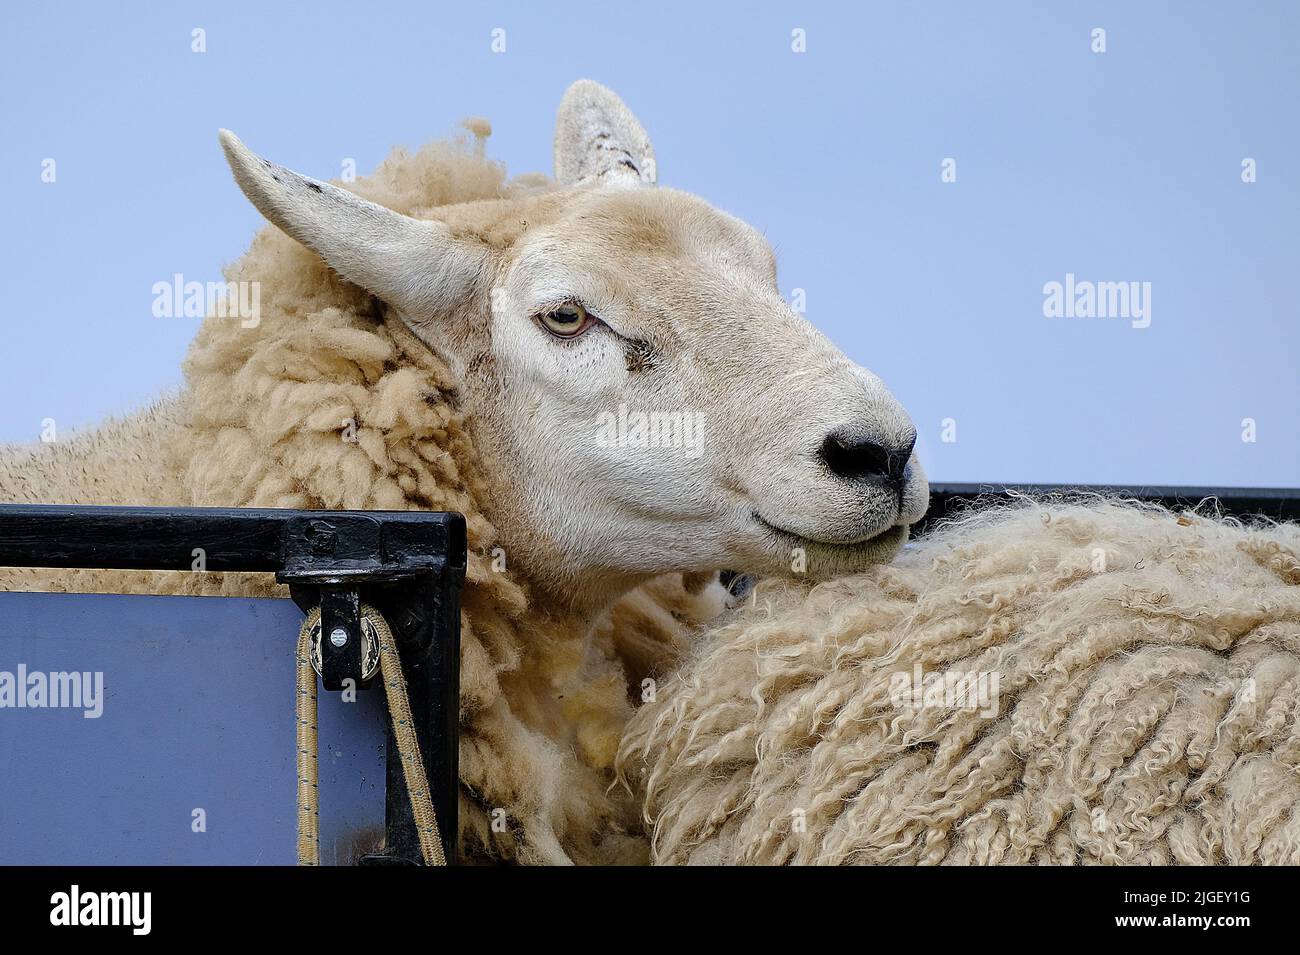 Sheep shearing by contractors on northern UK arm. Stock Photo